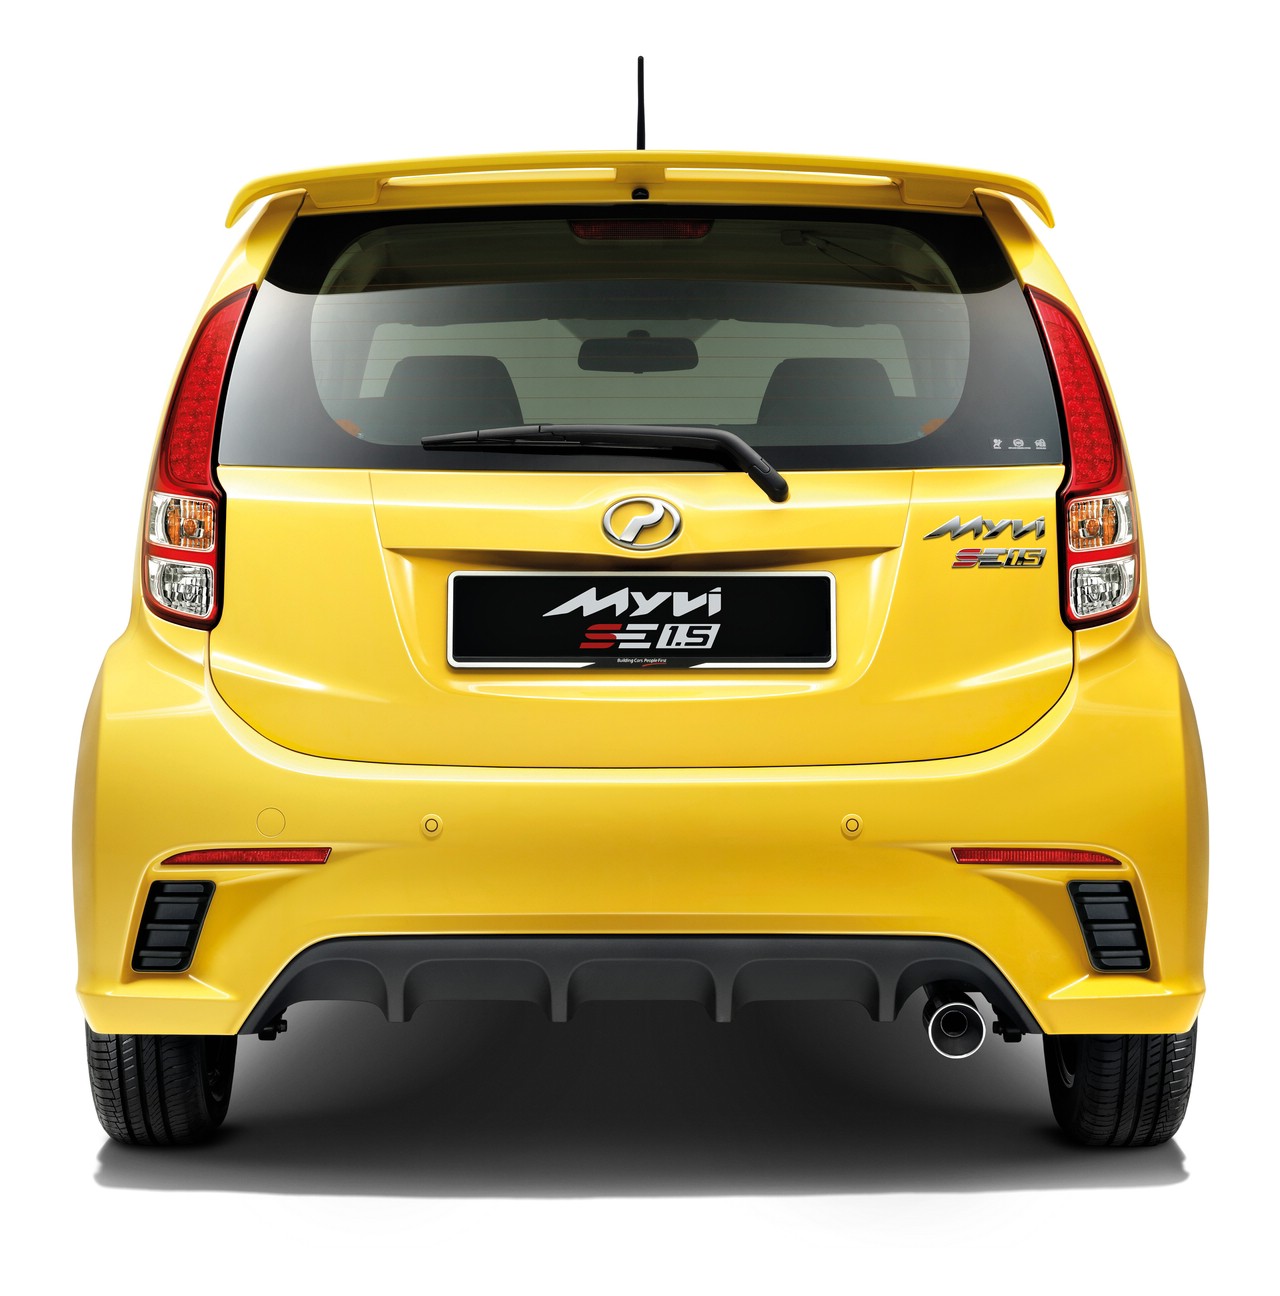 Perodua Myvi 1.5 Extreme and 1.5 SE Officially Launched in Malaysia